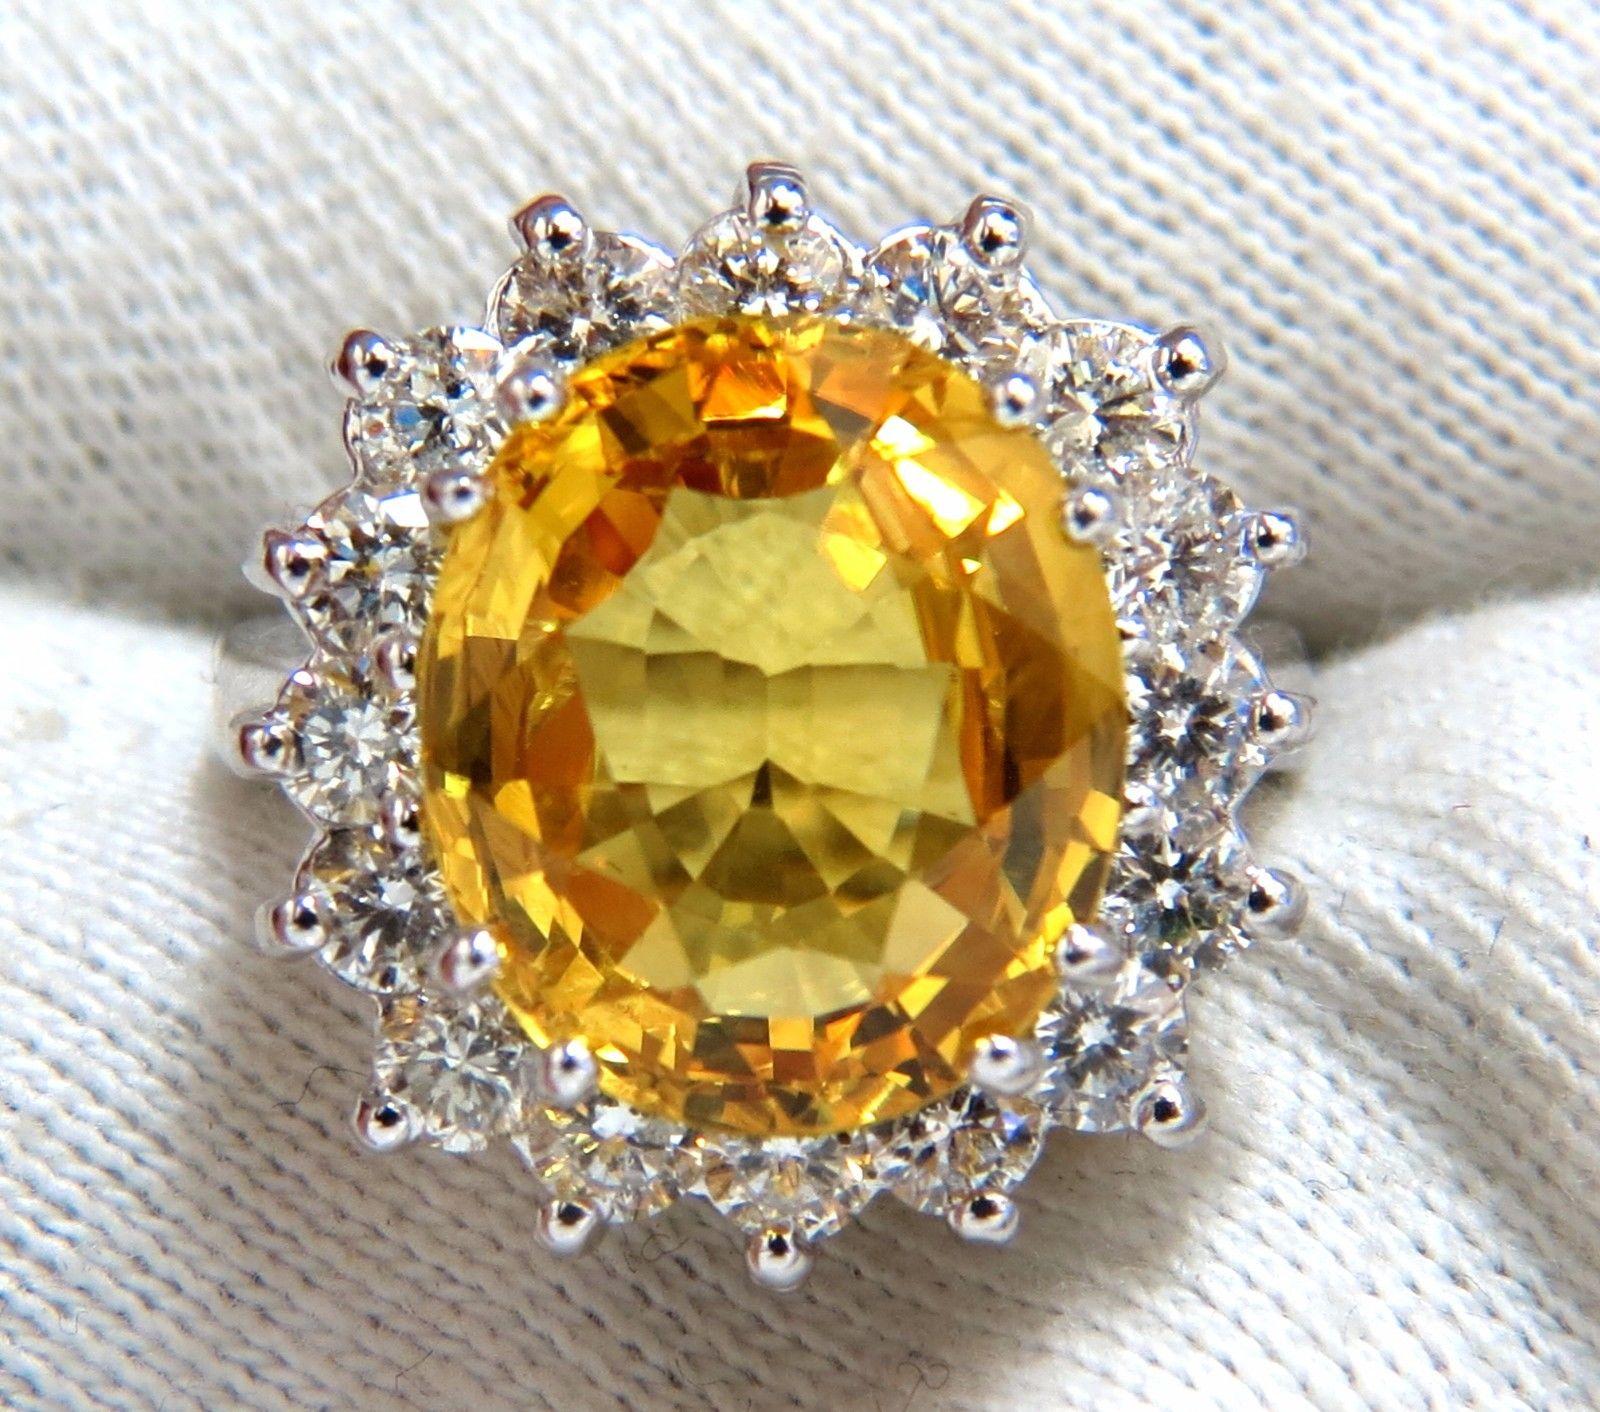 Canary Yellows.

 10.01ct Natural  Yellow Sapphire Ring

Full cut oval brilliant 

Clean Clarity & Transparent



1.80ct. Diamonds.

Rounds Full cuts 

G-color Vs-2 clarity.

  14kt. white gold

10 grams

Ring Current size: 6.5

(Free Resize